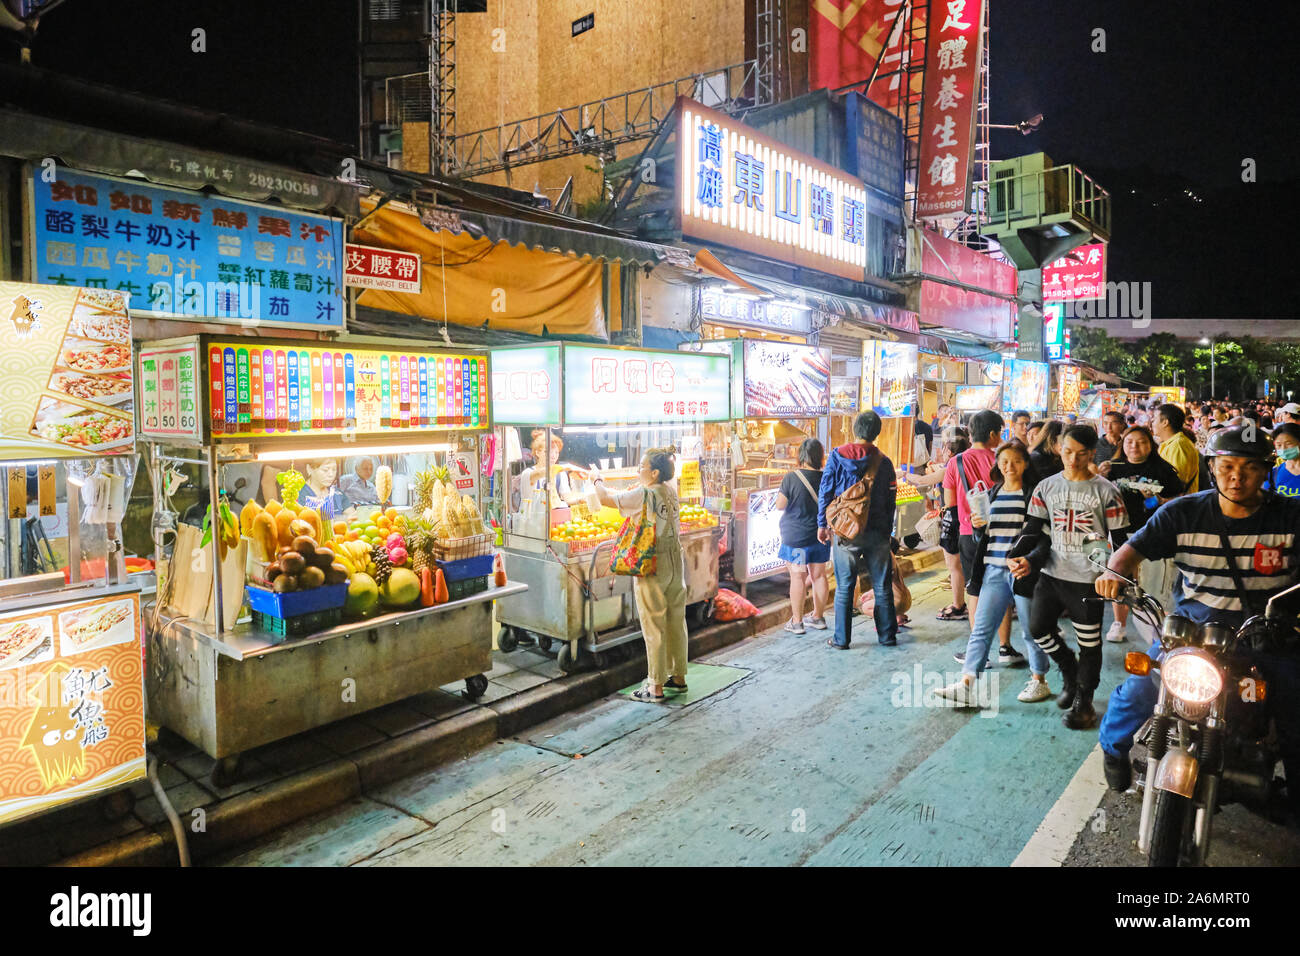 Food stall at Shilin Night Market in Taipei, the most famous night market in Taiwan. Stock Photo